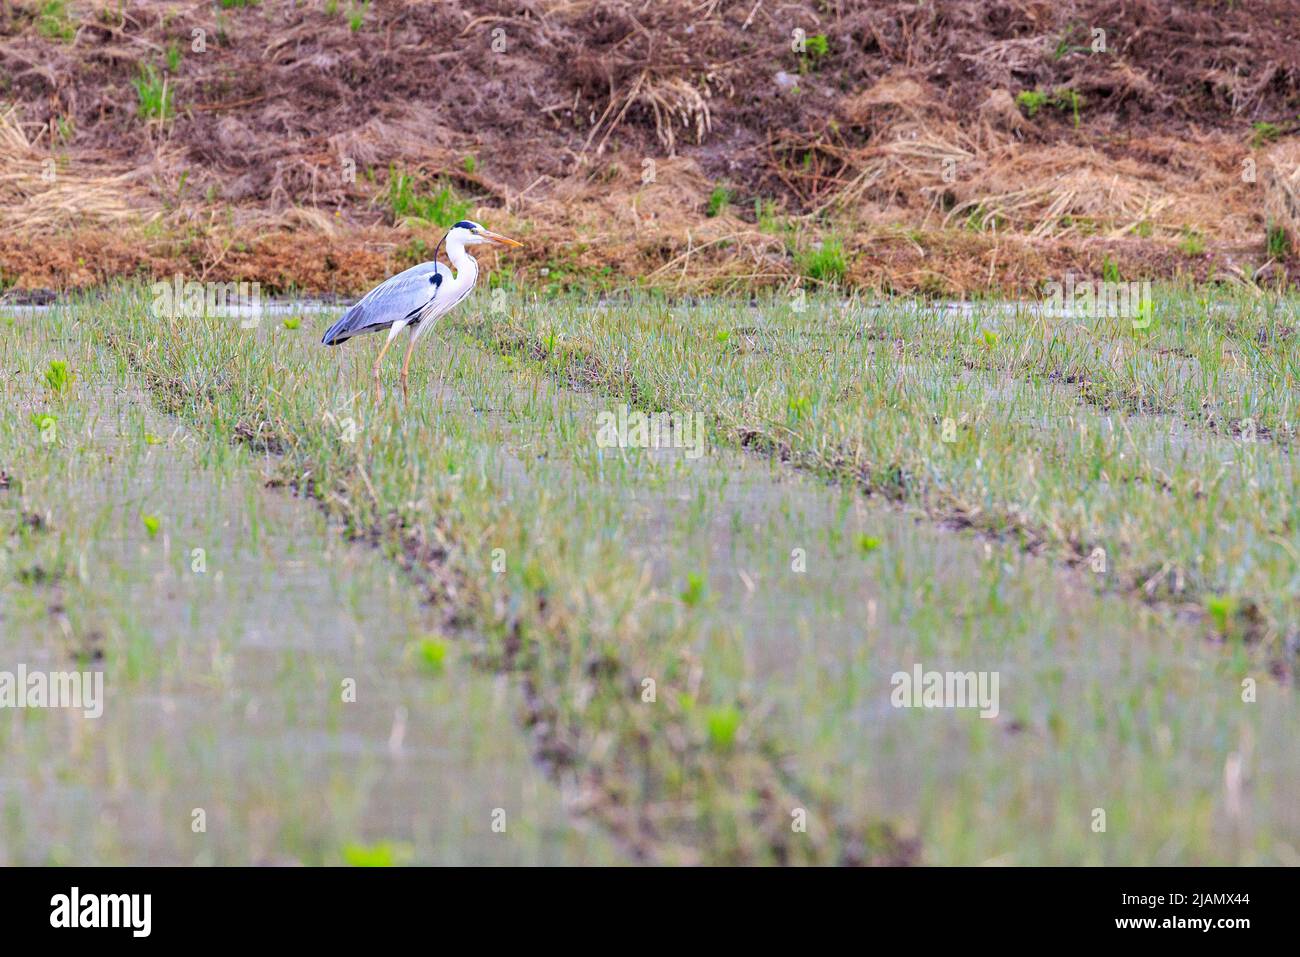 Grey heron stands in flooded green field Stock Photo